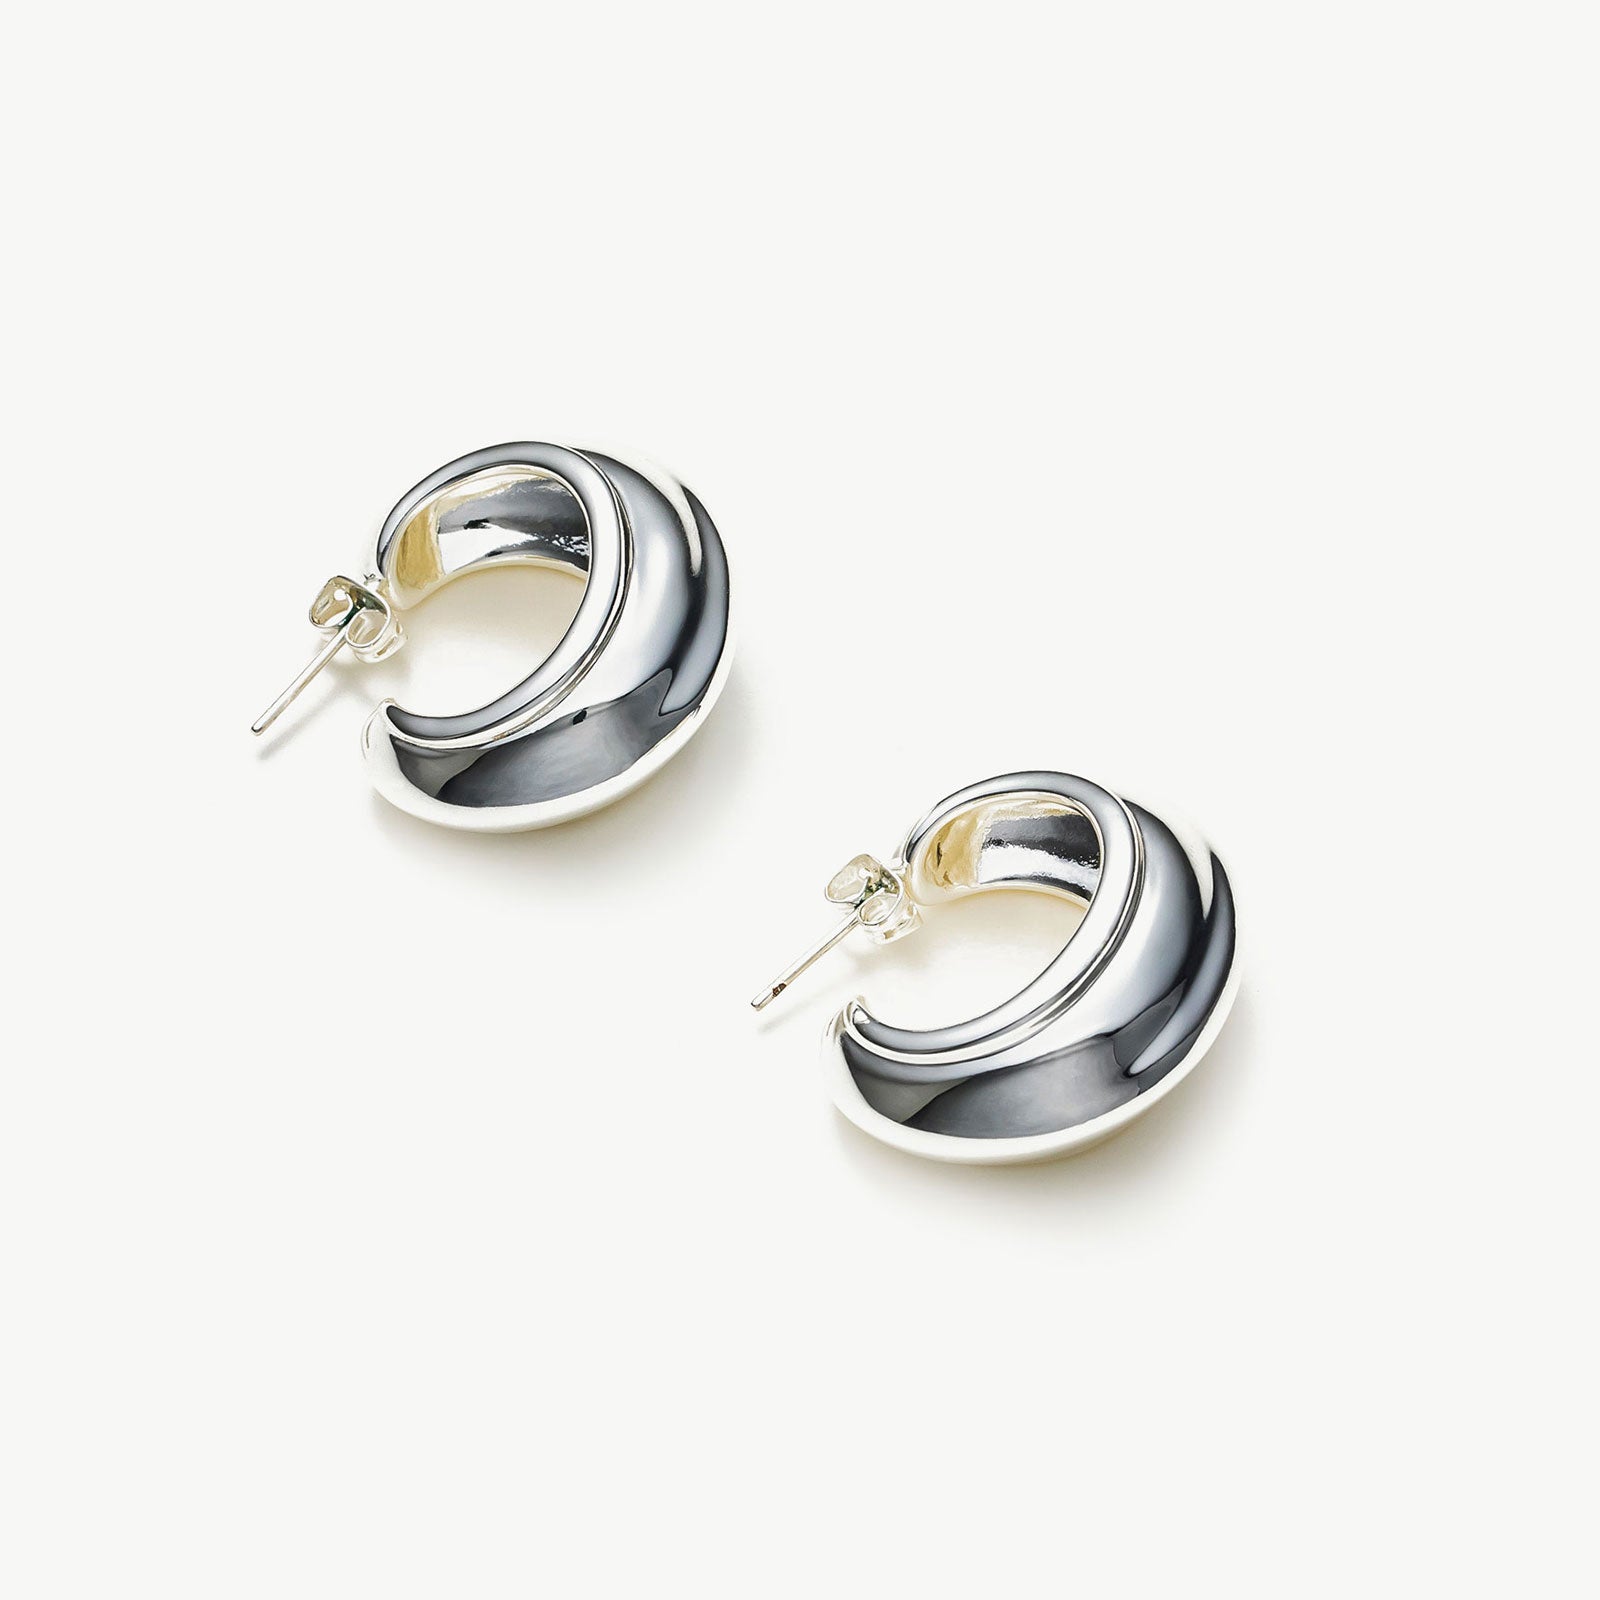 Modern Ridge Elegance: Ridge Hoop Earrings, showcasing a modern ridge design, these earrings exude elegance with a touch of contemporary flair, making them a stylish accessory for any occasion.